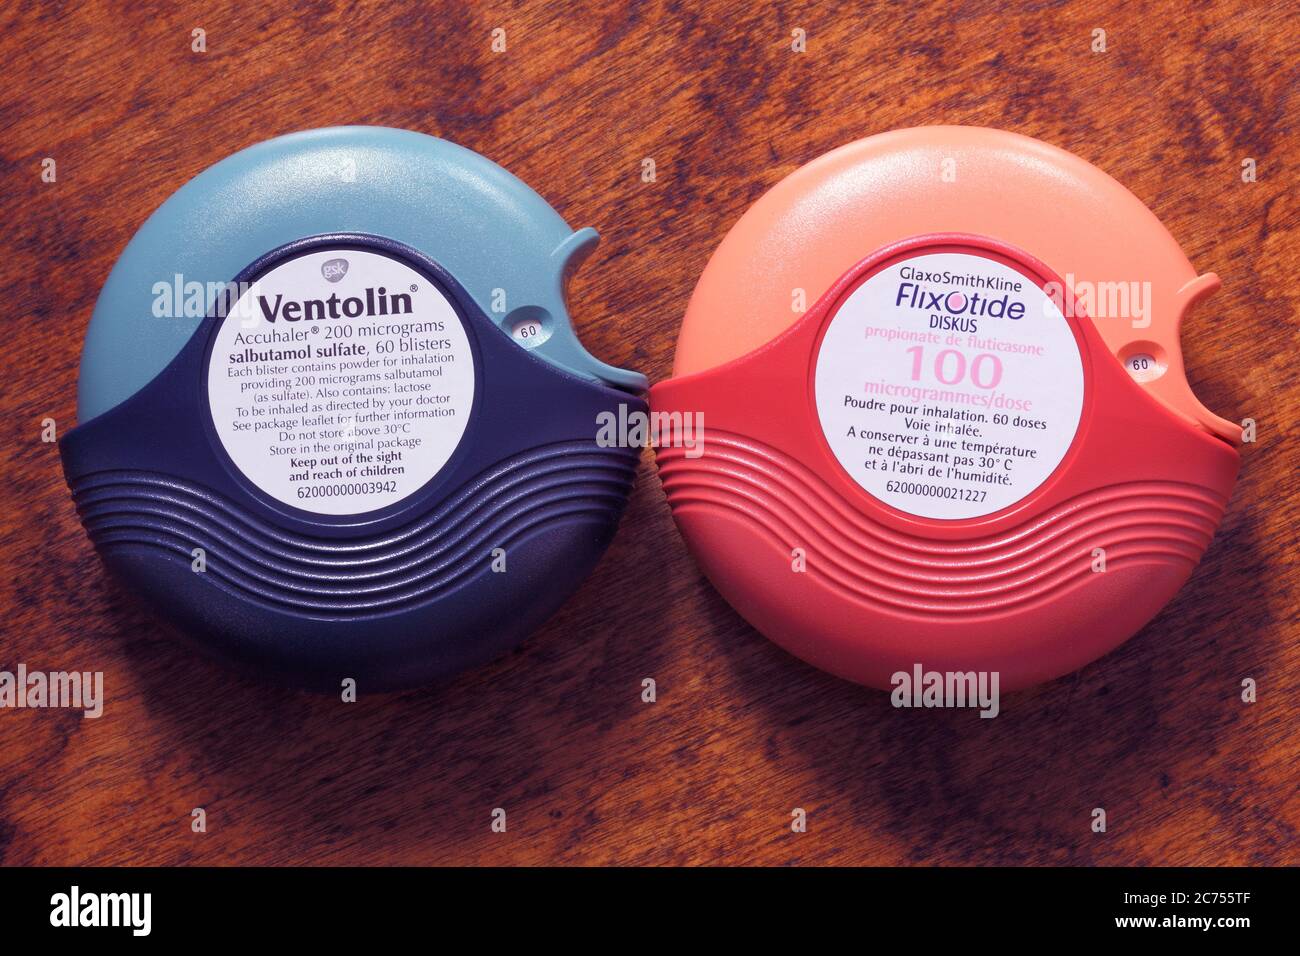 Blue Ventolin asthma reliever and orange Flixotide preventer accuhalers or  inhalers Stock Photo - Alamy